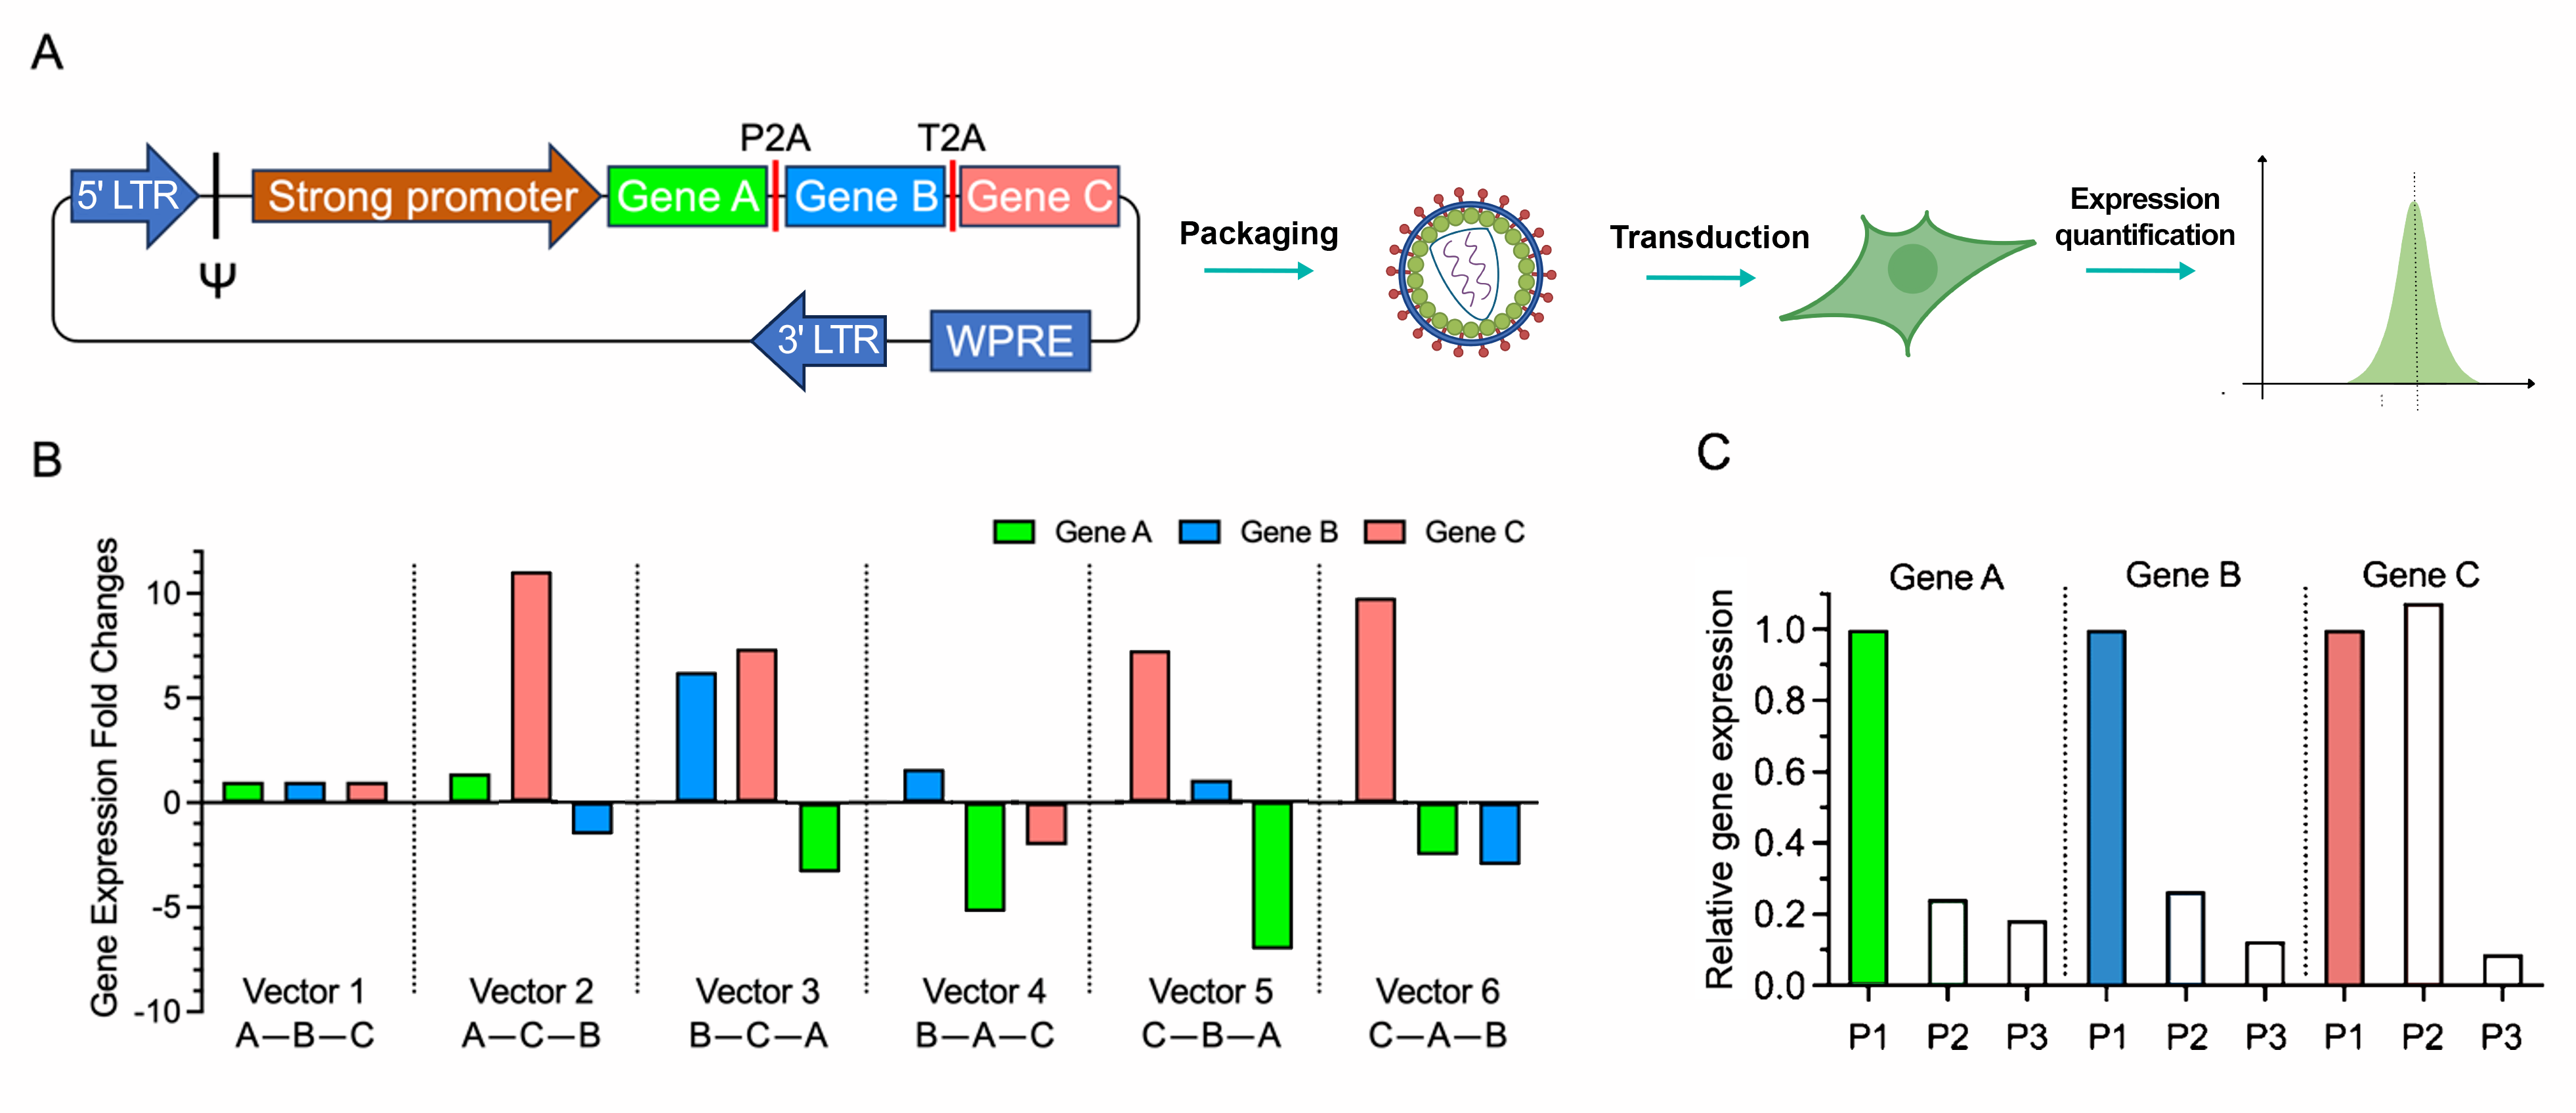 Comparison of position-dependent gene expression levels in 2A linked polycistronic vectors.